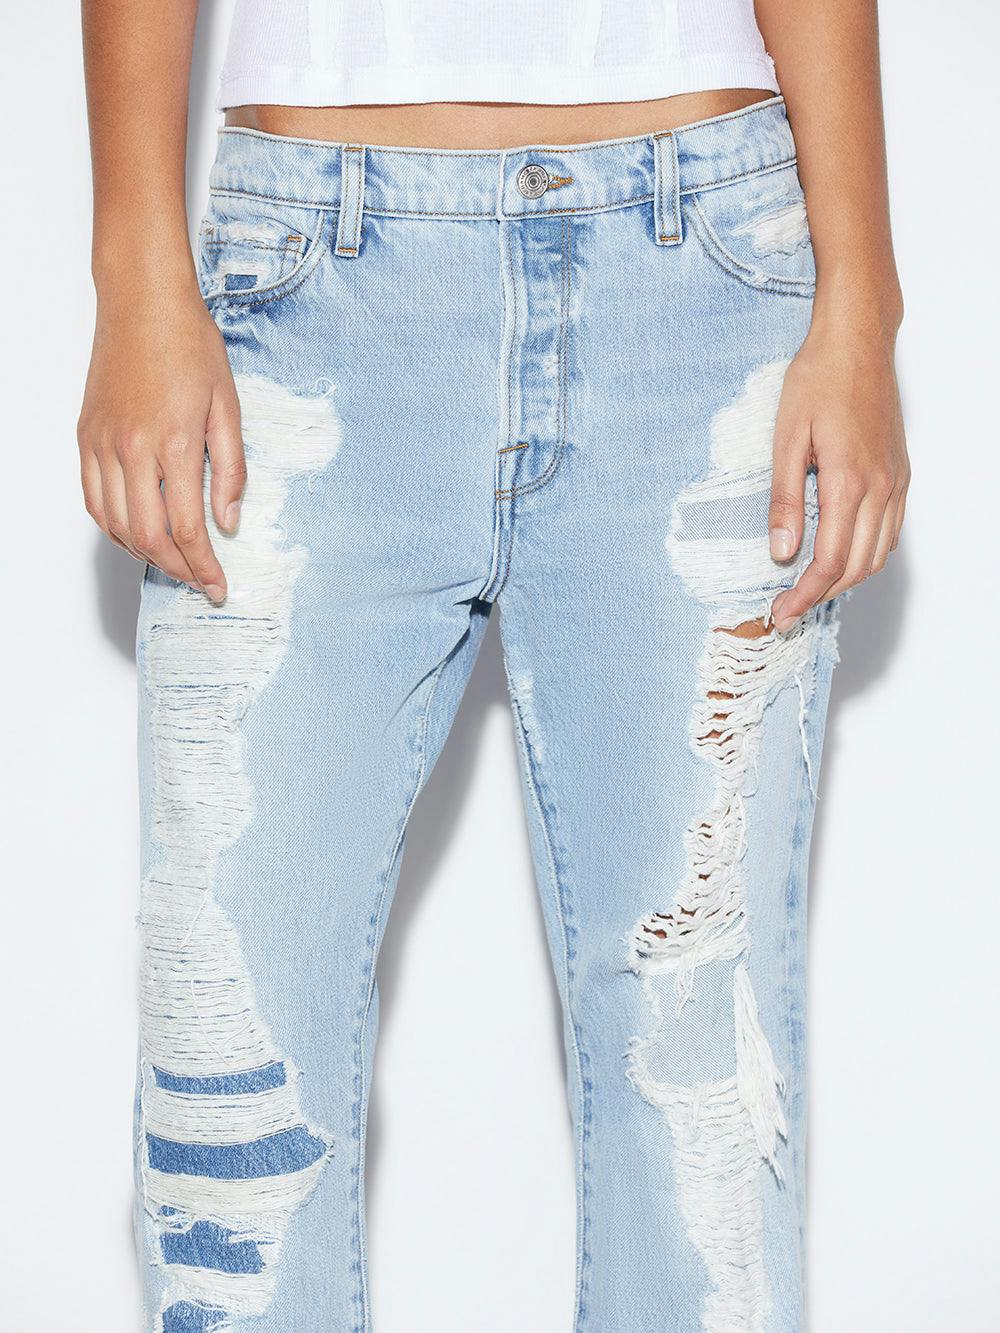 jeans front detail view